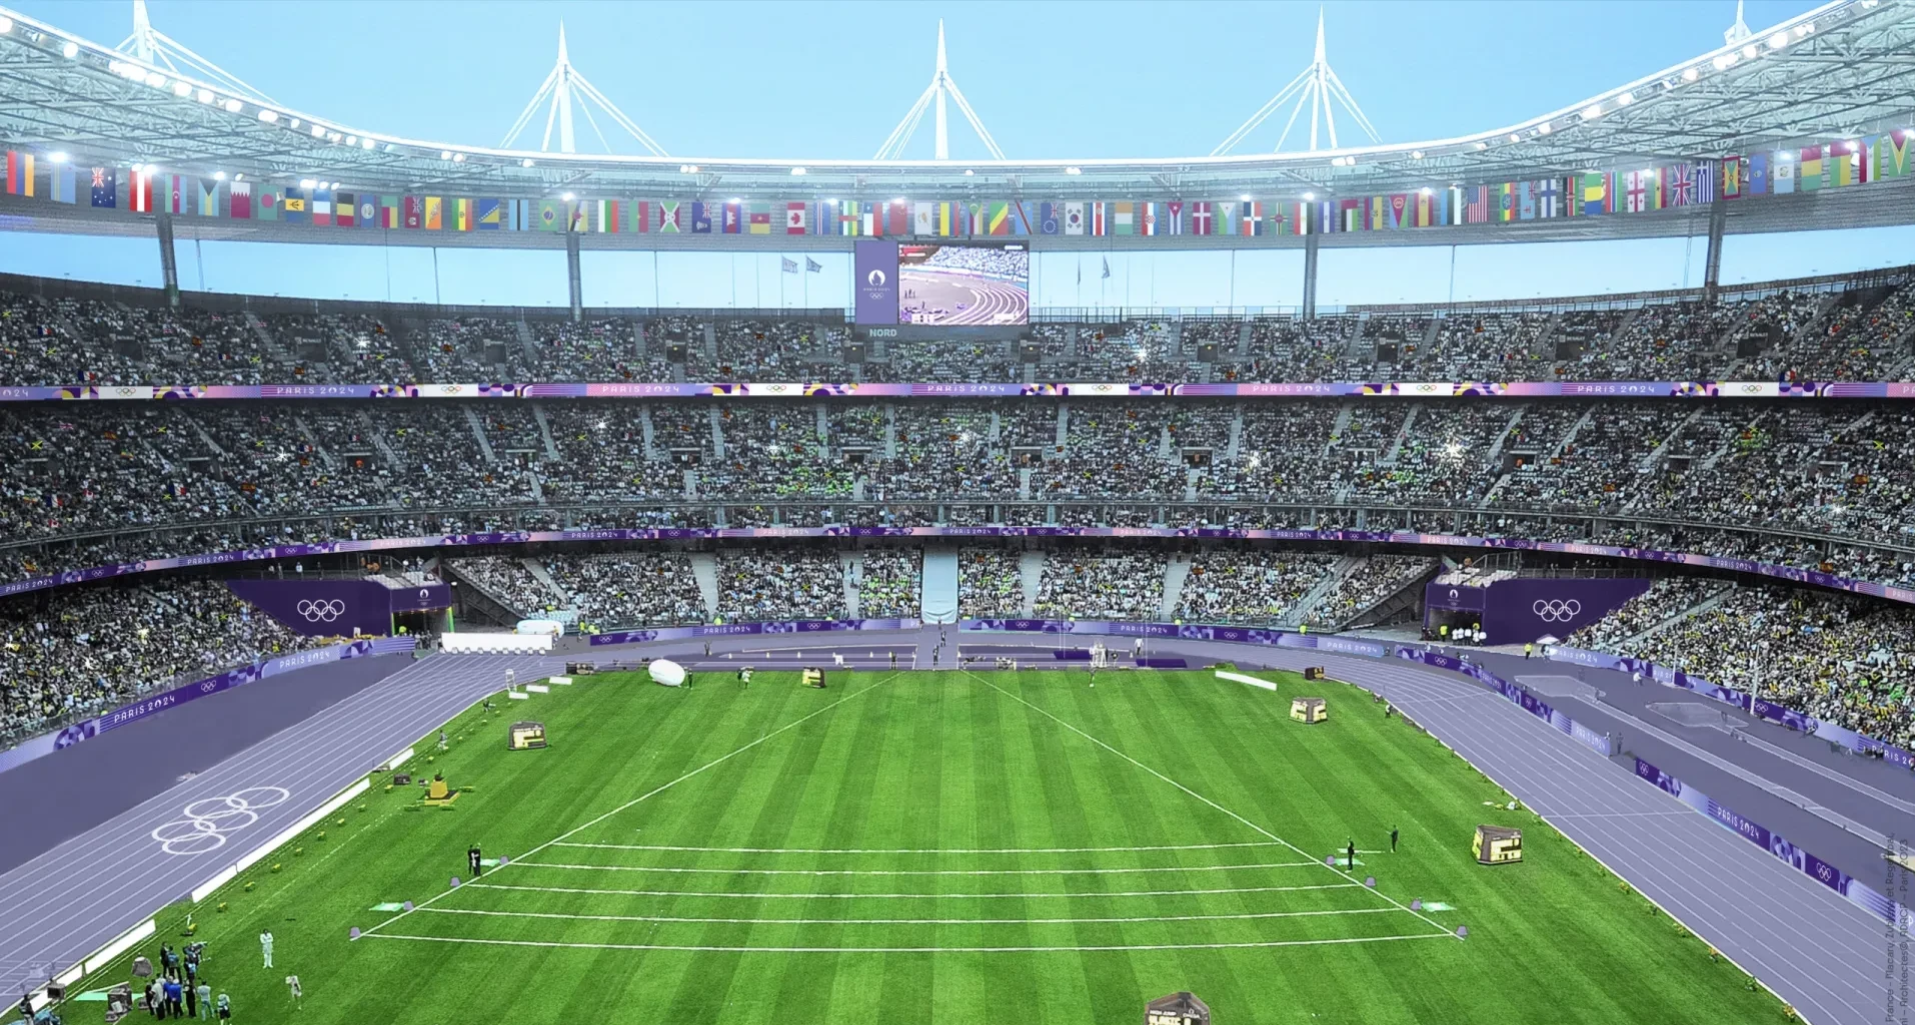 The Stade de France is one of 13 venues where overlay and temporary structures are to be provided by Arena under the terms of the deal ©Paris 2024